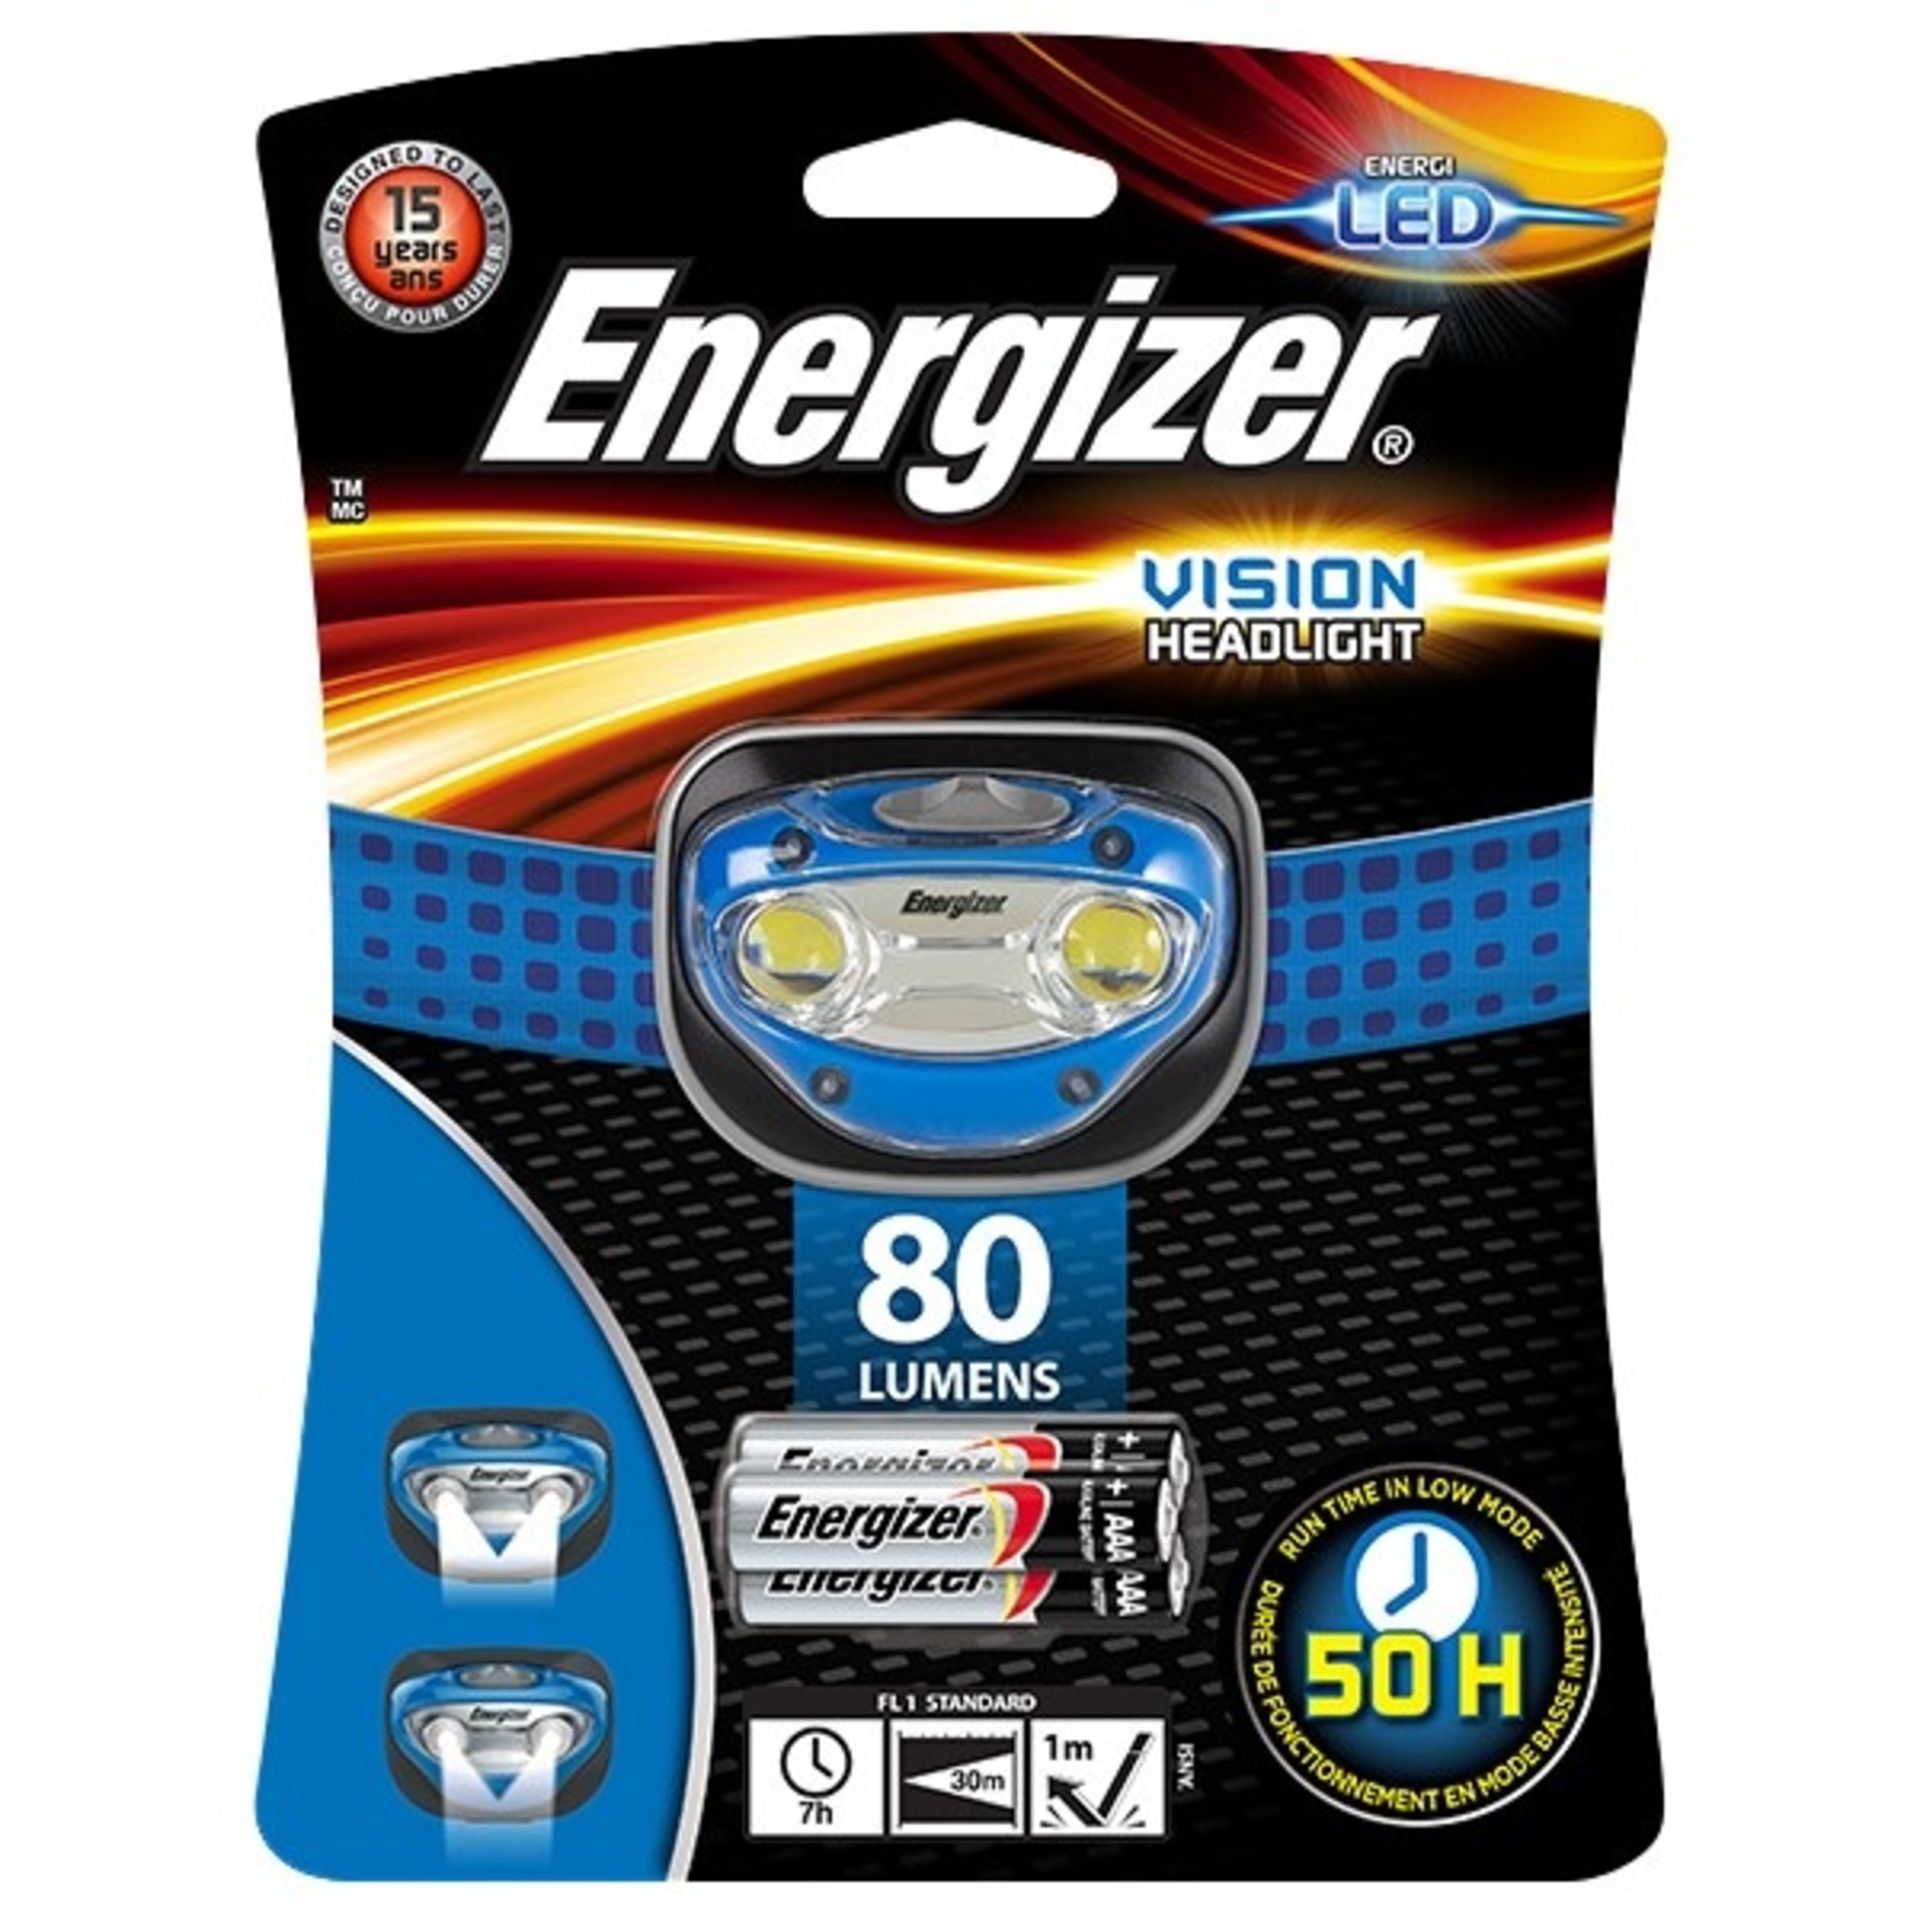 Brand New Energizer LED 80 Lumens Vision Headlight ISP £8.99 (The Gift & Gadget Store) X 2 YOUR BID